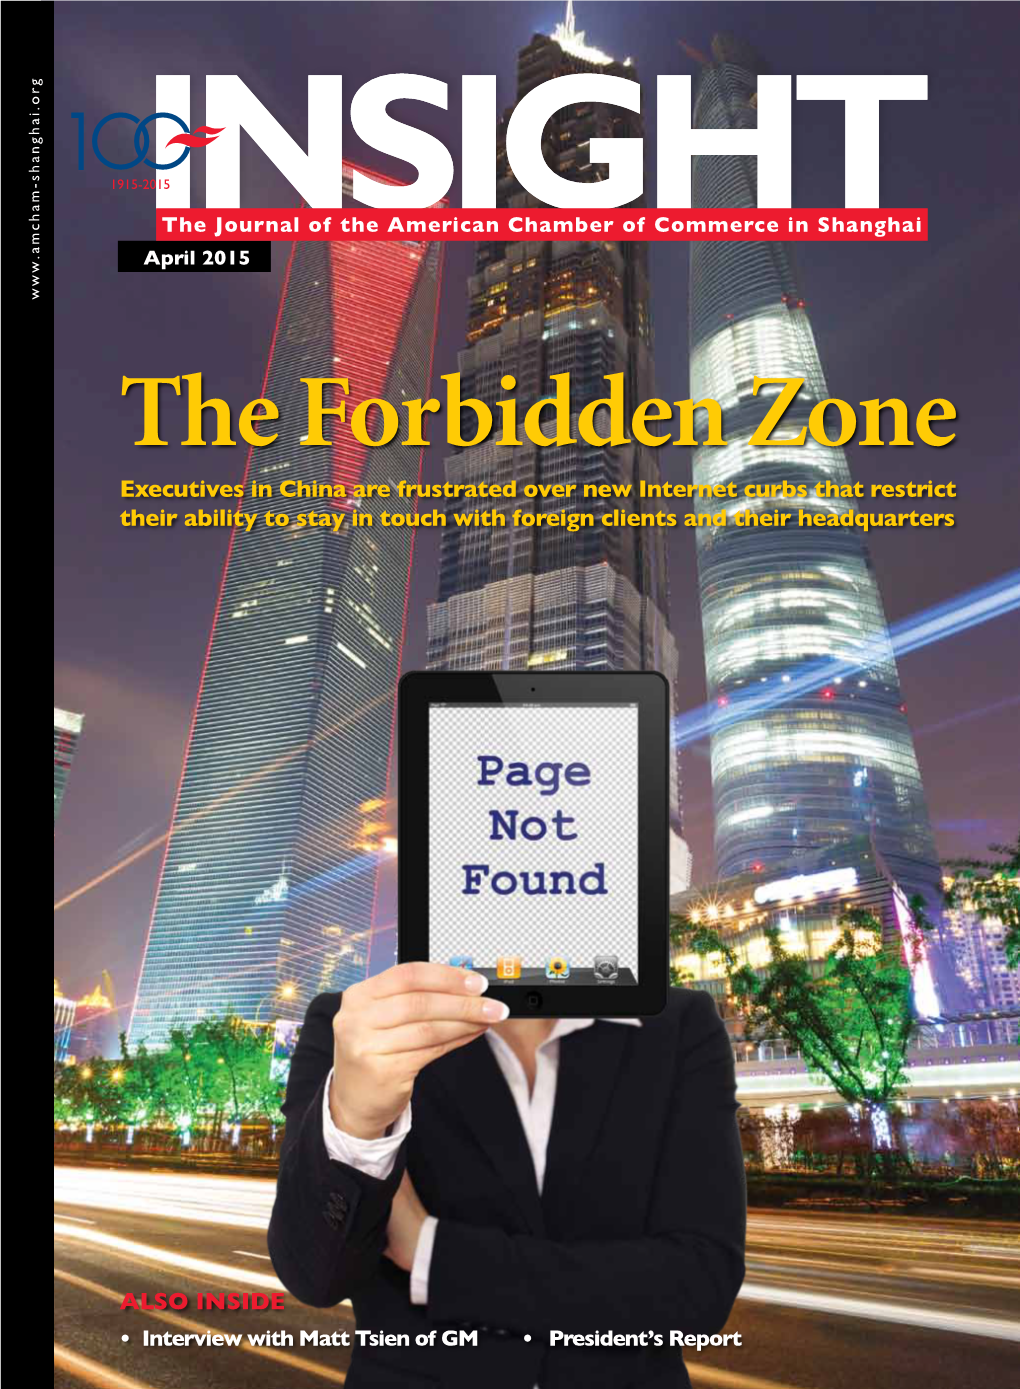 The Forbidden Zone Executives in China Are Frustrated Over New Internet Curbs That Restrict Their Ability to Stay in Touch with Foreign Clients and Their Headquarters